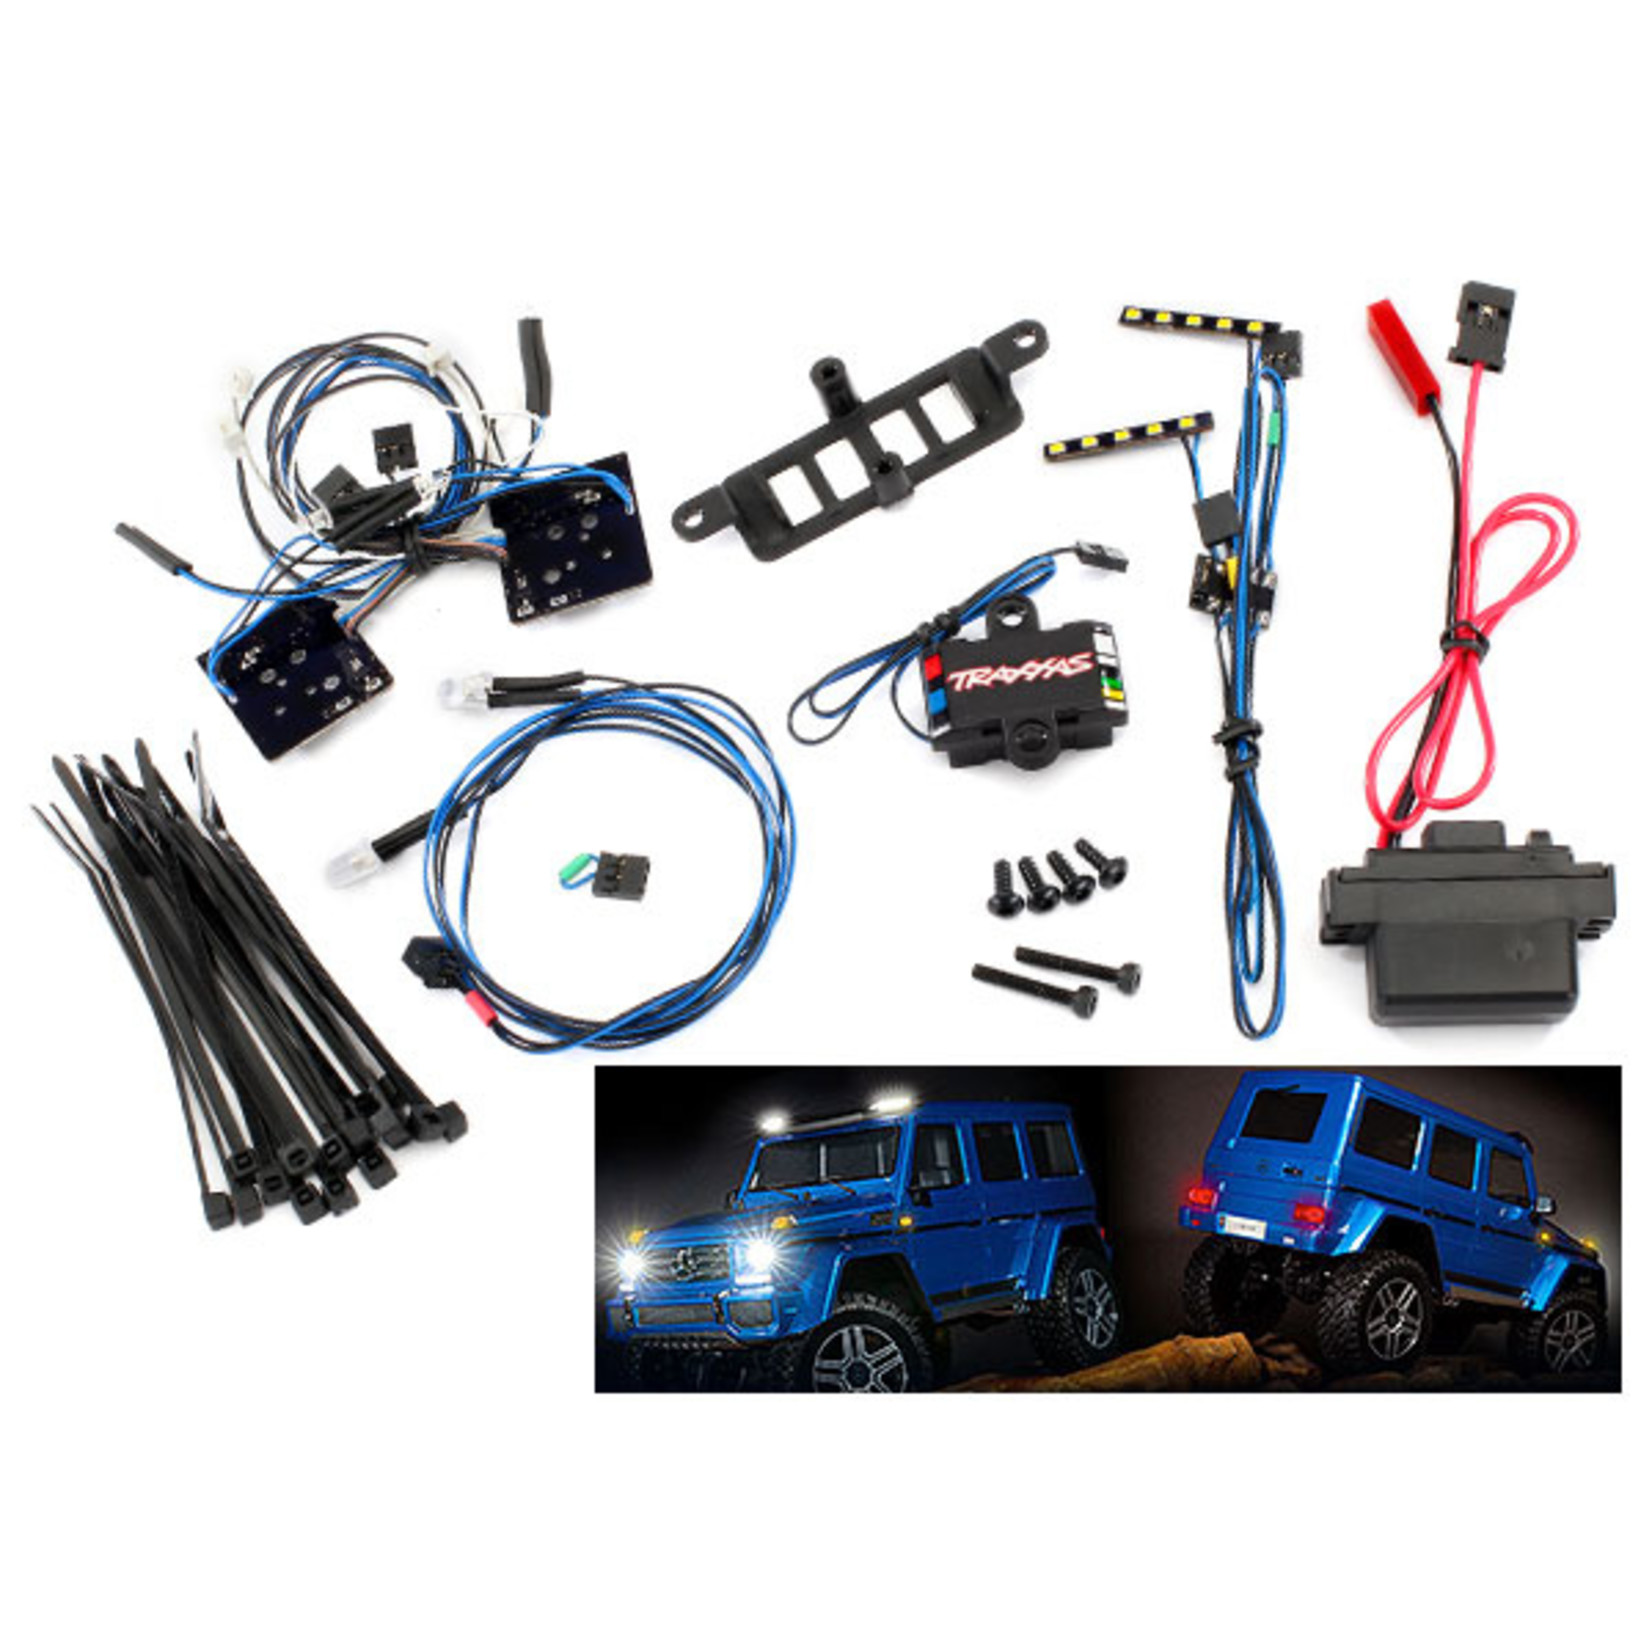 Traxxas 8898 - LED light set, complete with power supply (